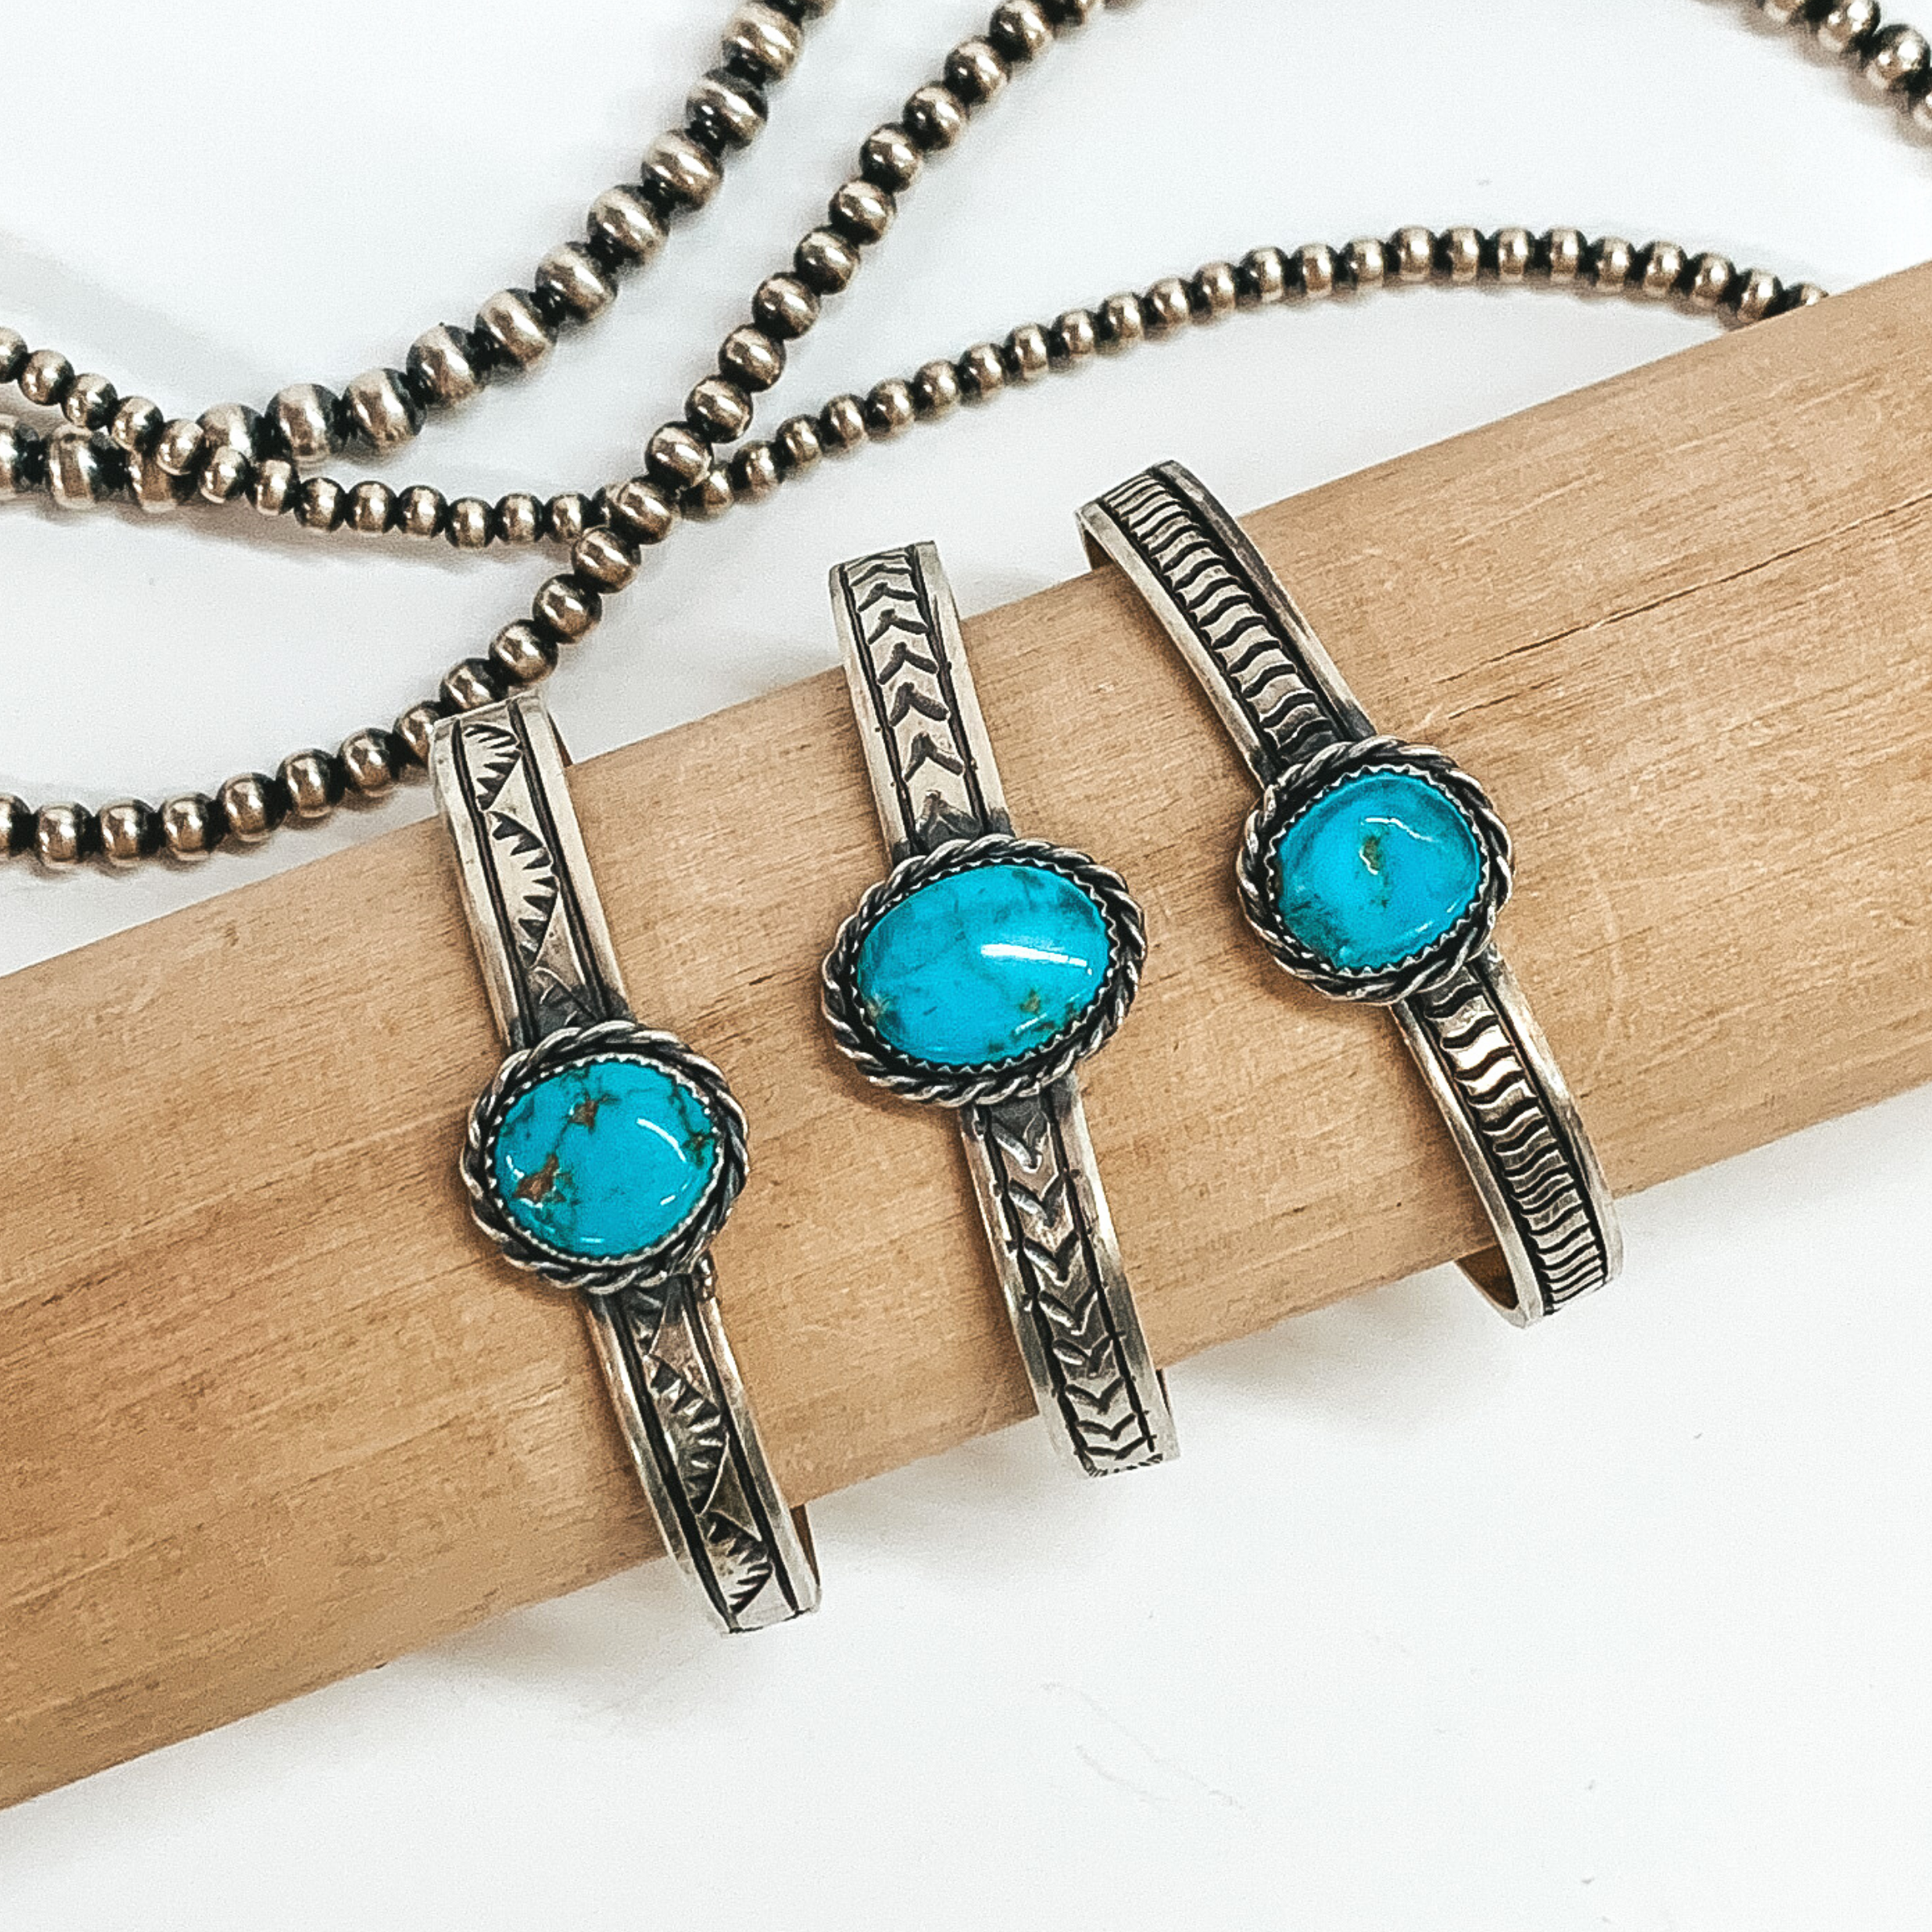 Three silver, engraved bracelets with a center turquoise stone. These bracelet are pictured on a tan bracelet holder on a white background. 